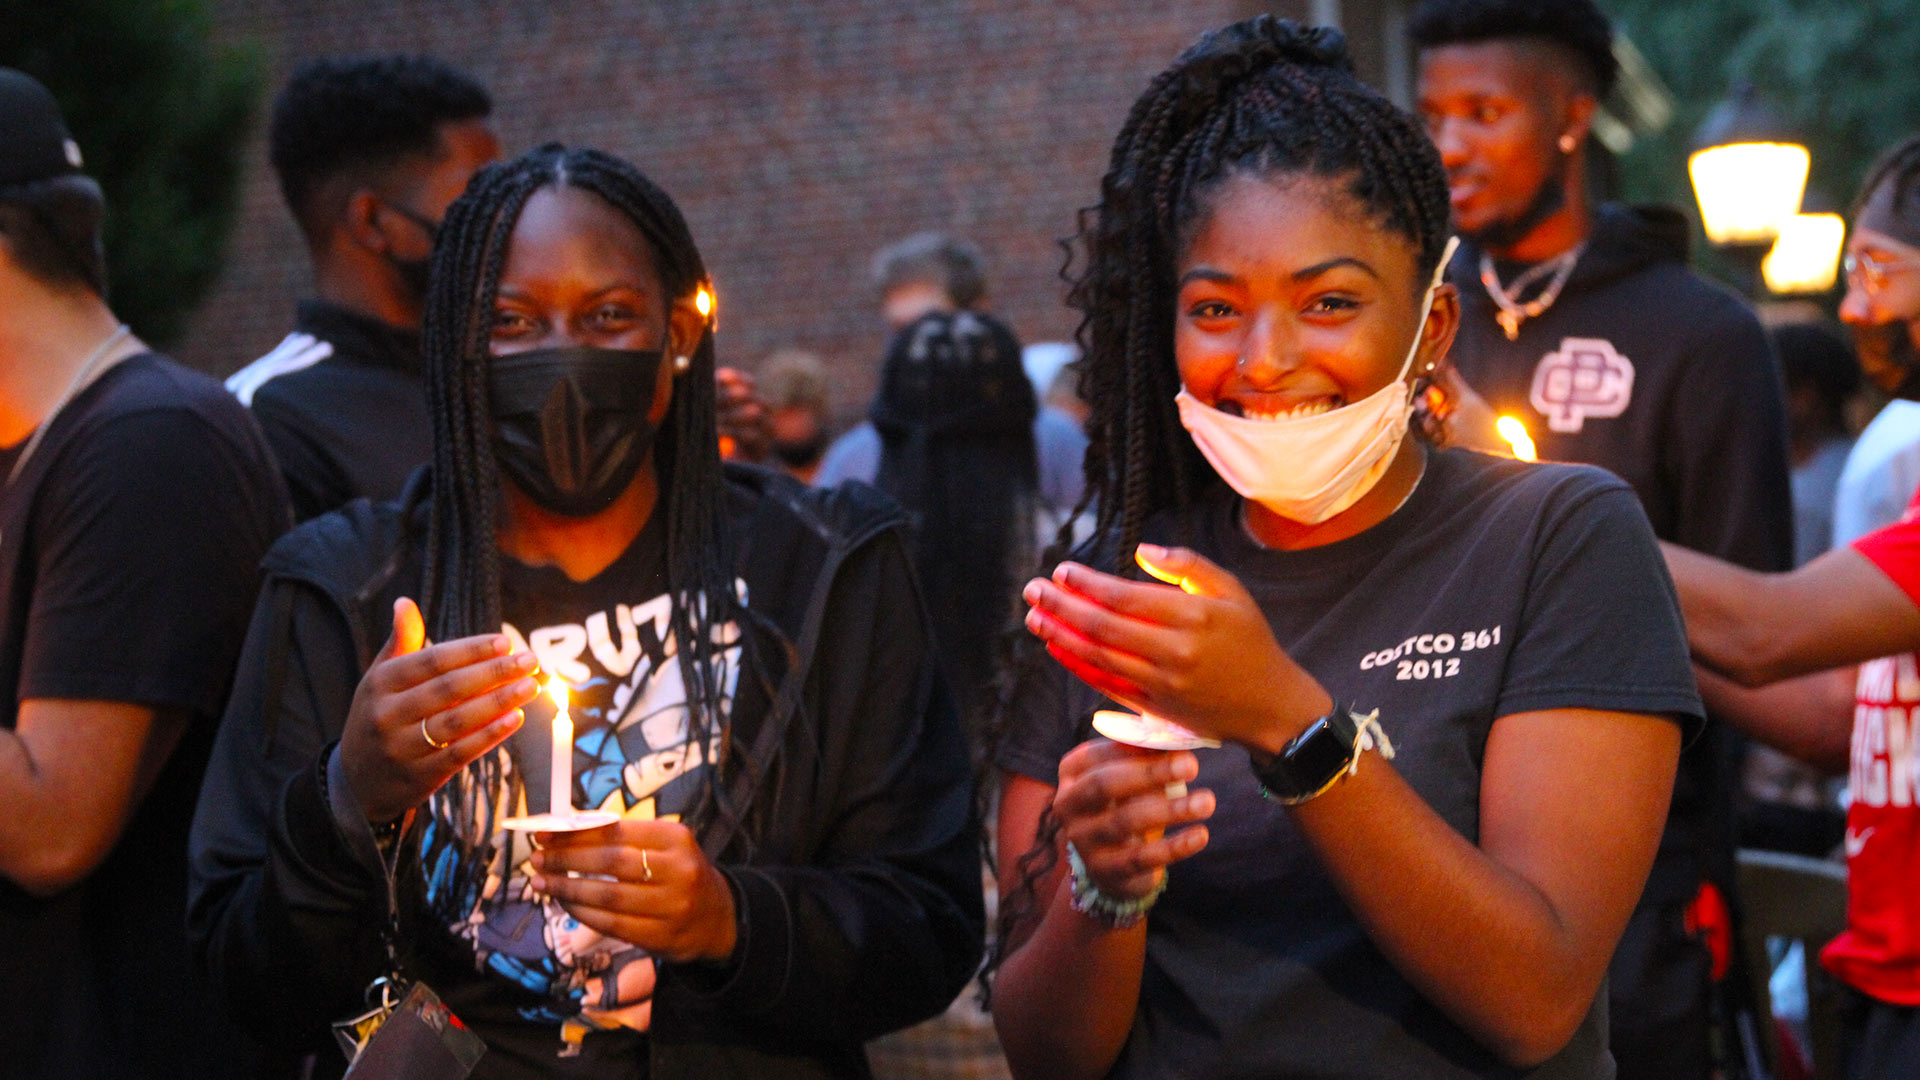 Two students protect their candle flames while they smile at the camera.